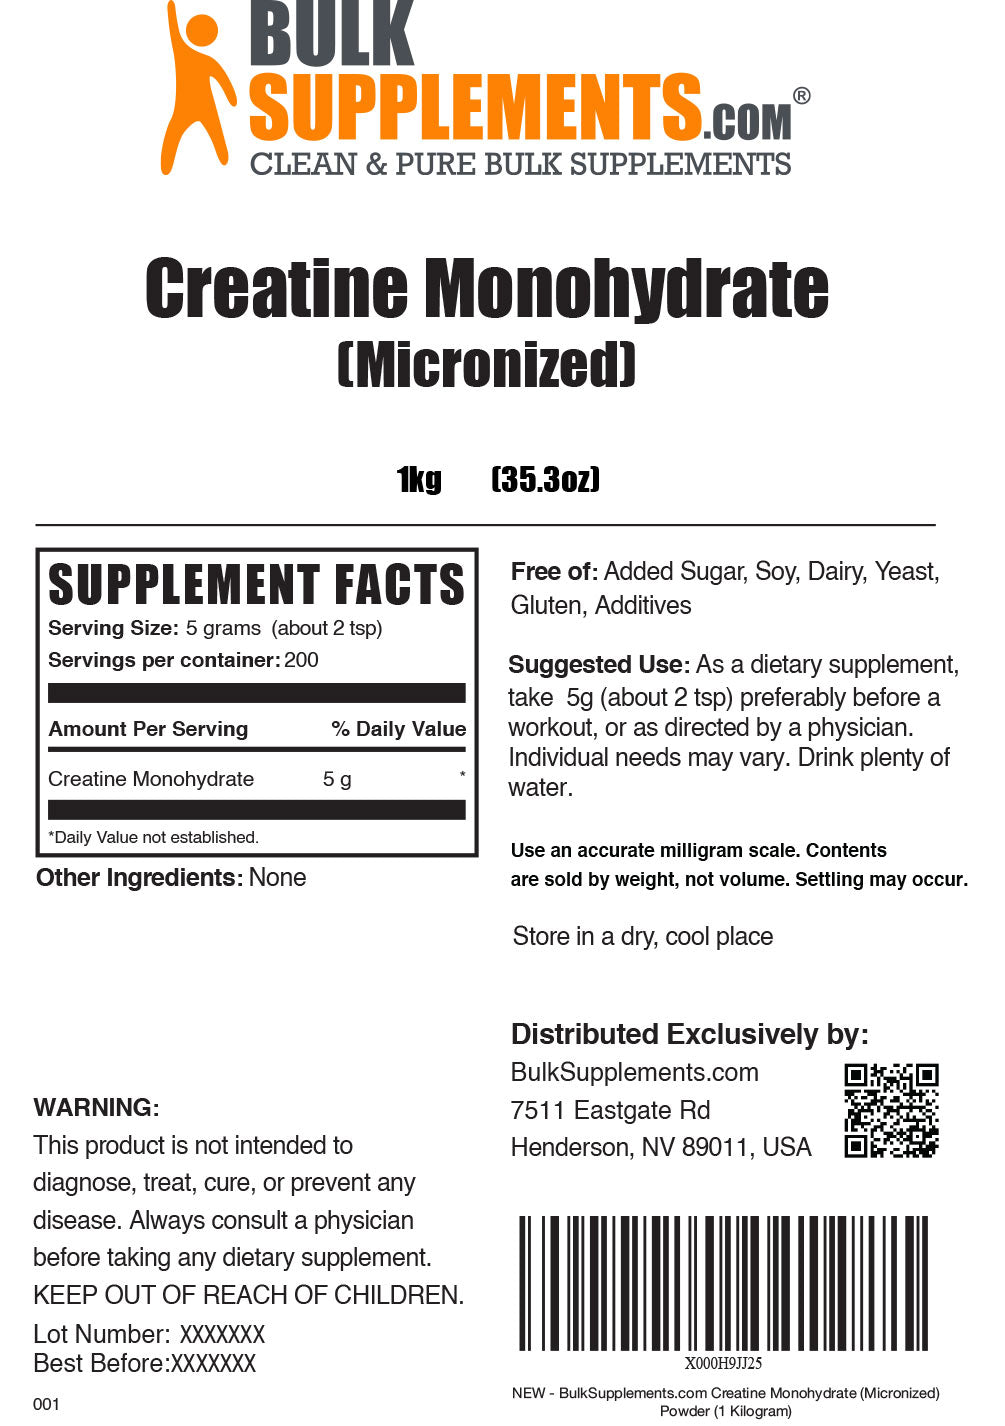 Creatine Monohydrate Supplement Facts and Serving Size for 1kg bag